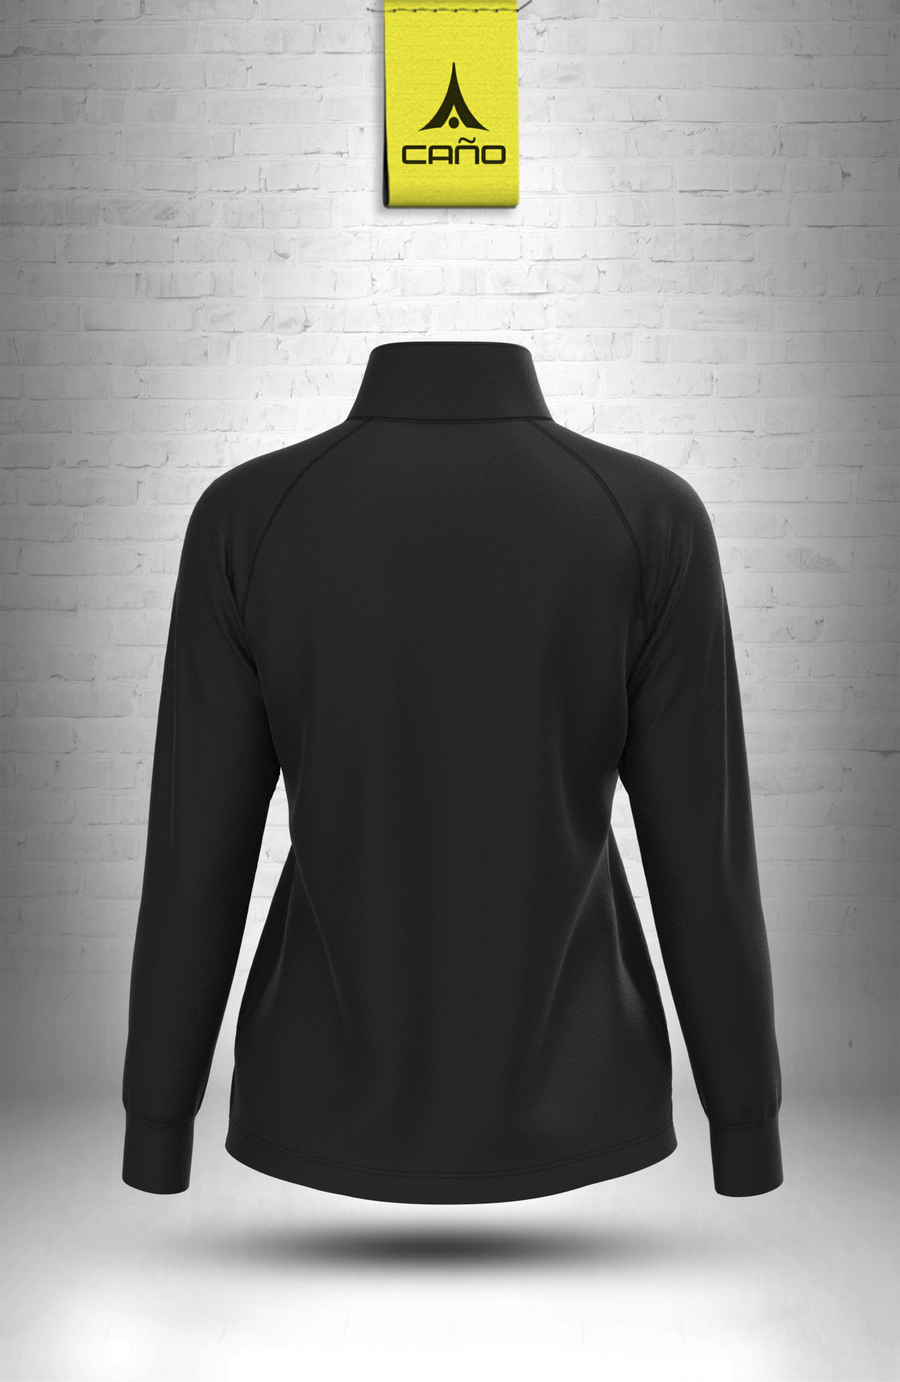 $40.00 - Caño Women’s 1/4 Zip 4 Way Stretch High Quality Yoga Material Jacket (Fitted)